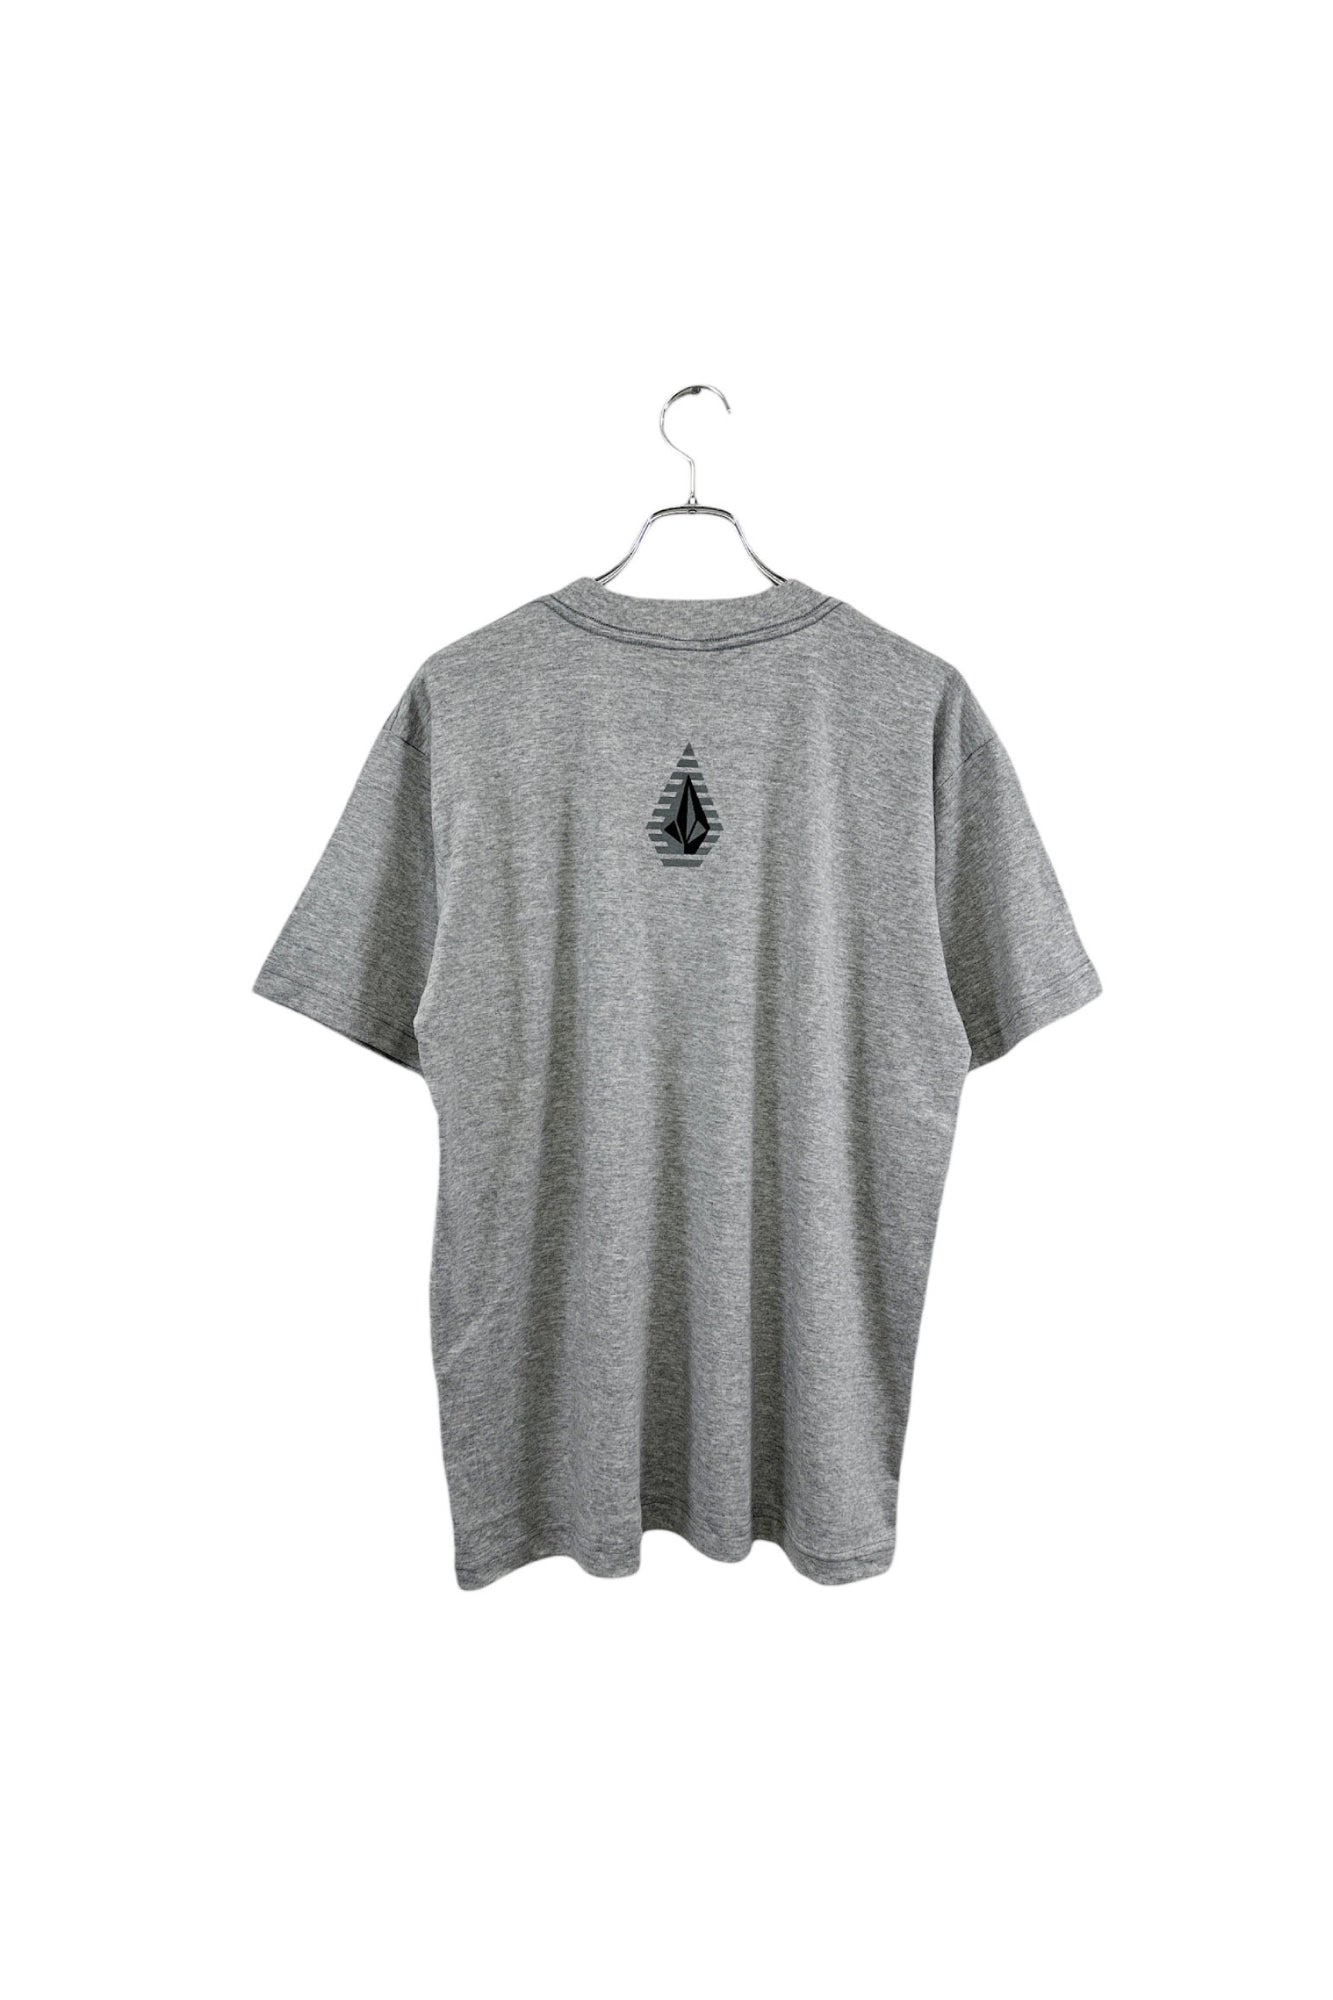 90's Made in USA VOLCOM T-shirt